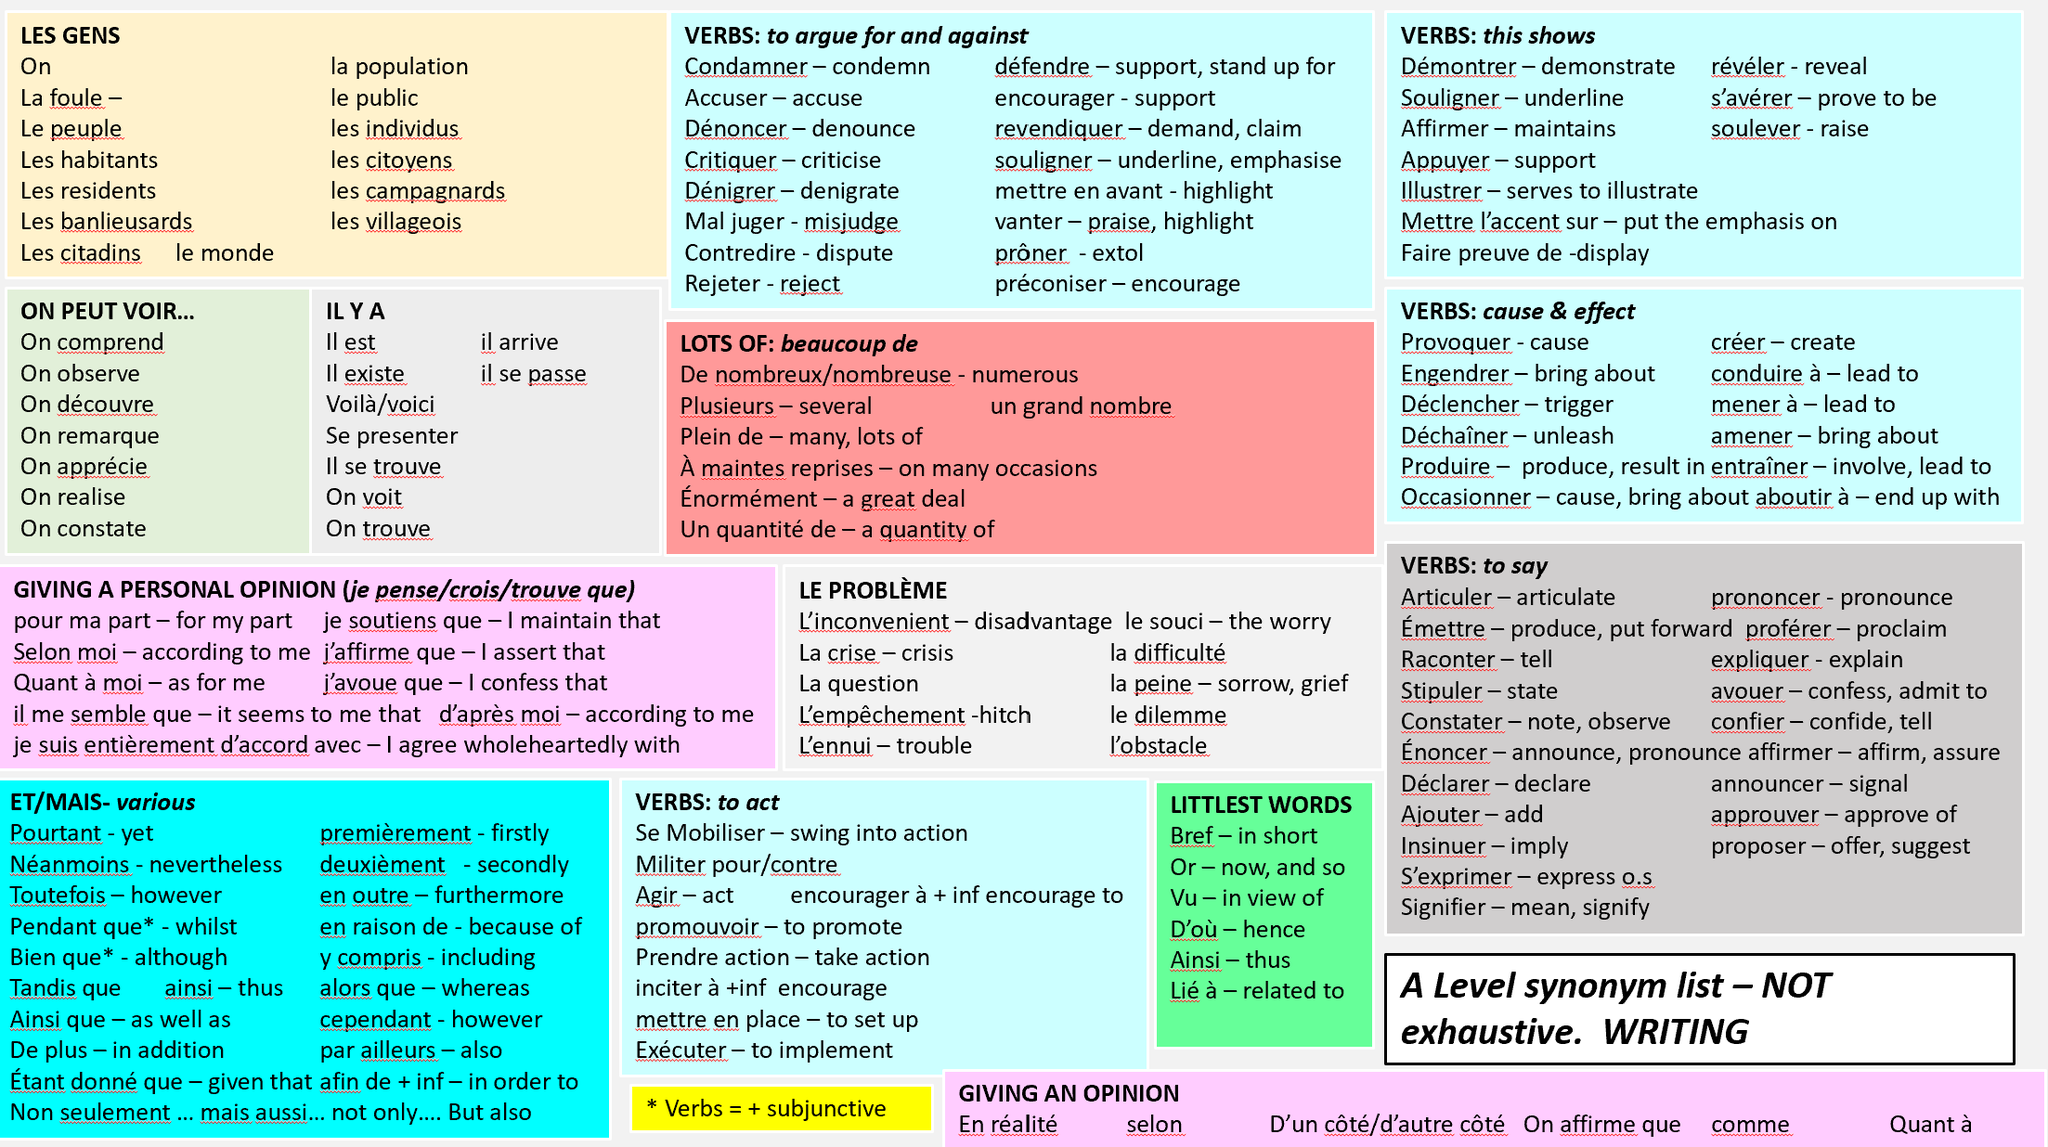 Baz on Twitter: "This A LEVEL SYNONYM MAT by no means exhaustive. to your thoughts My main aim was to provide synonyms for writing to enable greater variety.